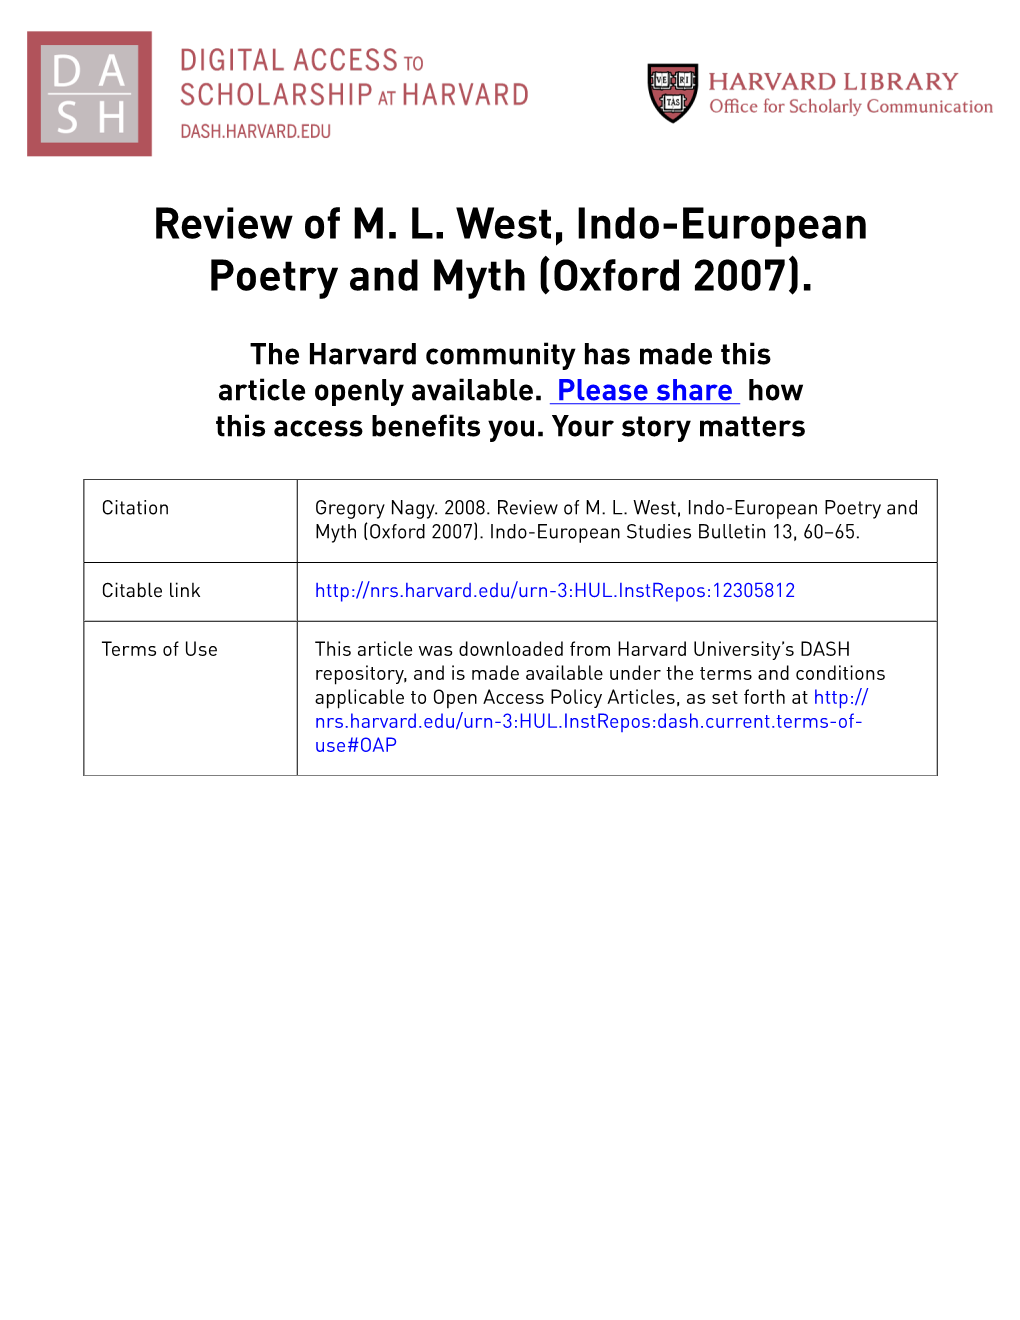 Review of ML West, Indo-European Poetry and Myth